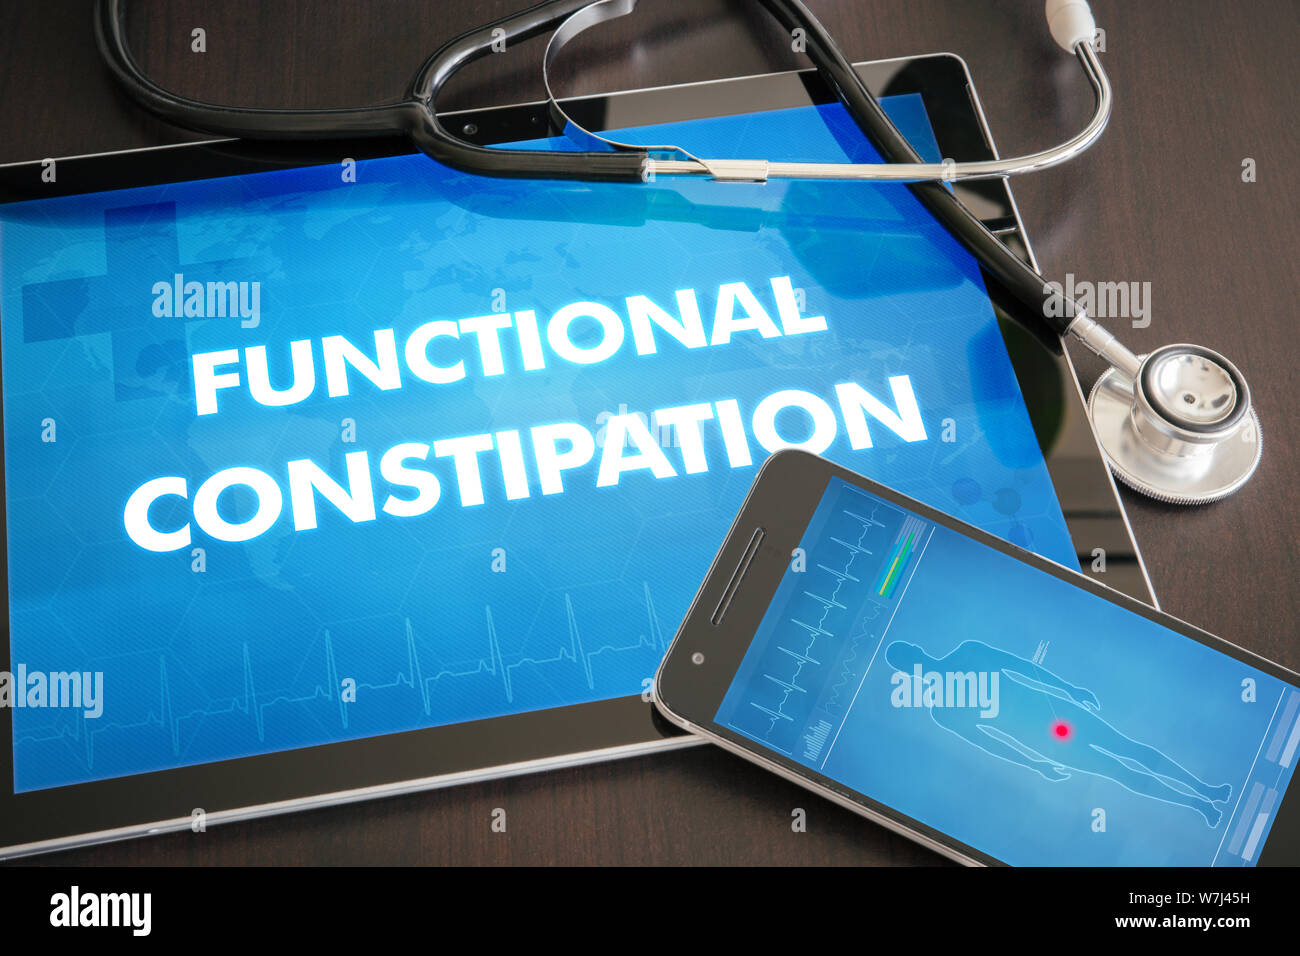 Functional constipation (gastrointestinal disease related) diagnosis medical concept on tablet screen with stethoscope. Stock Photo